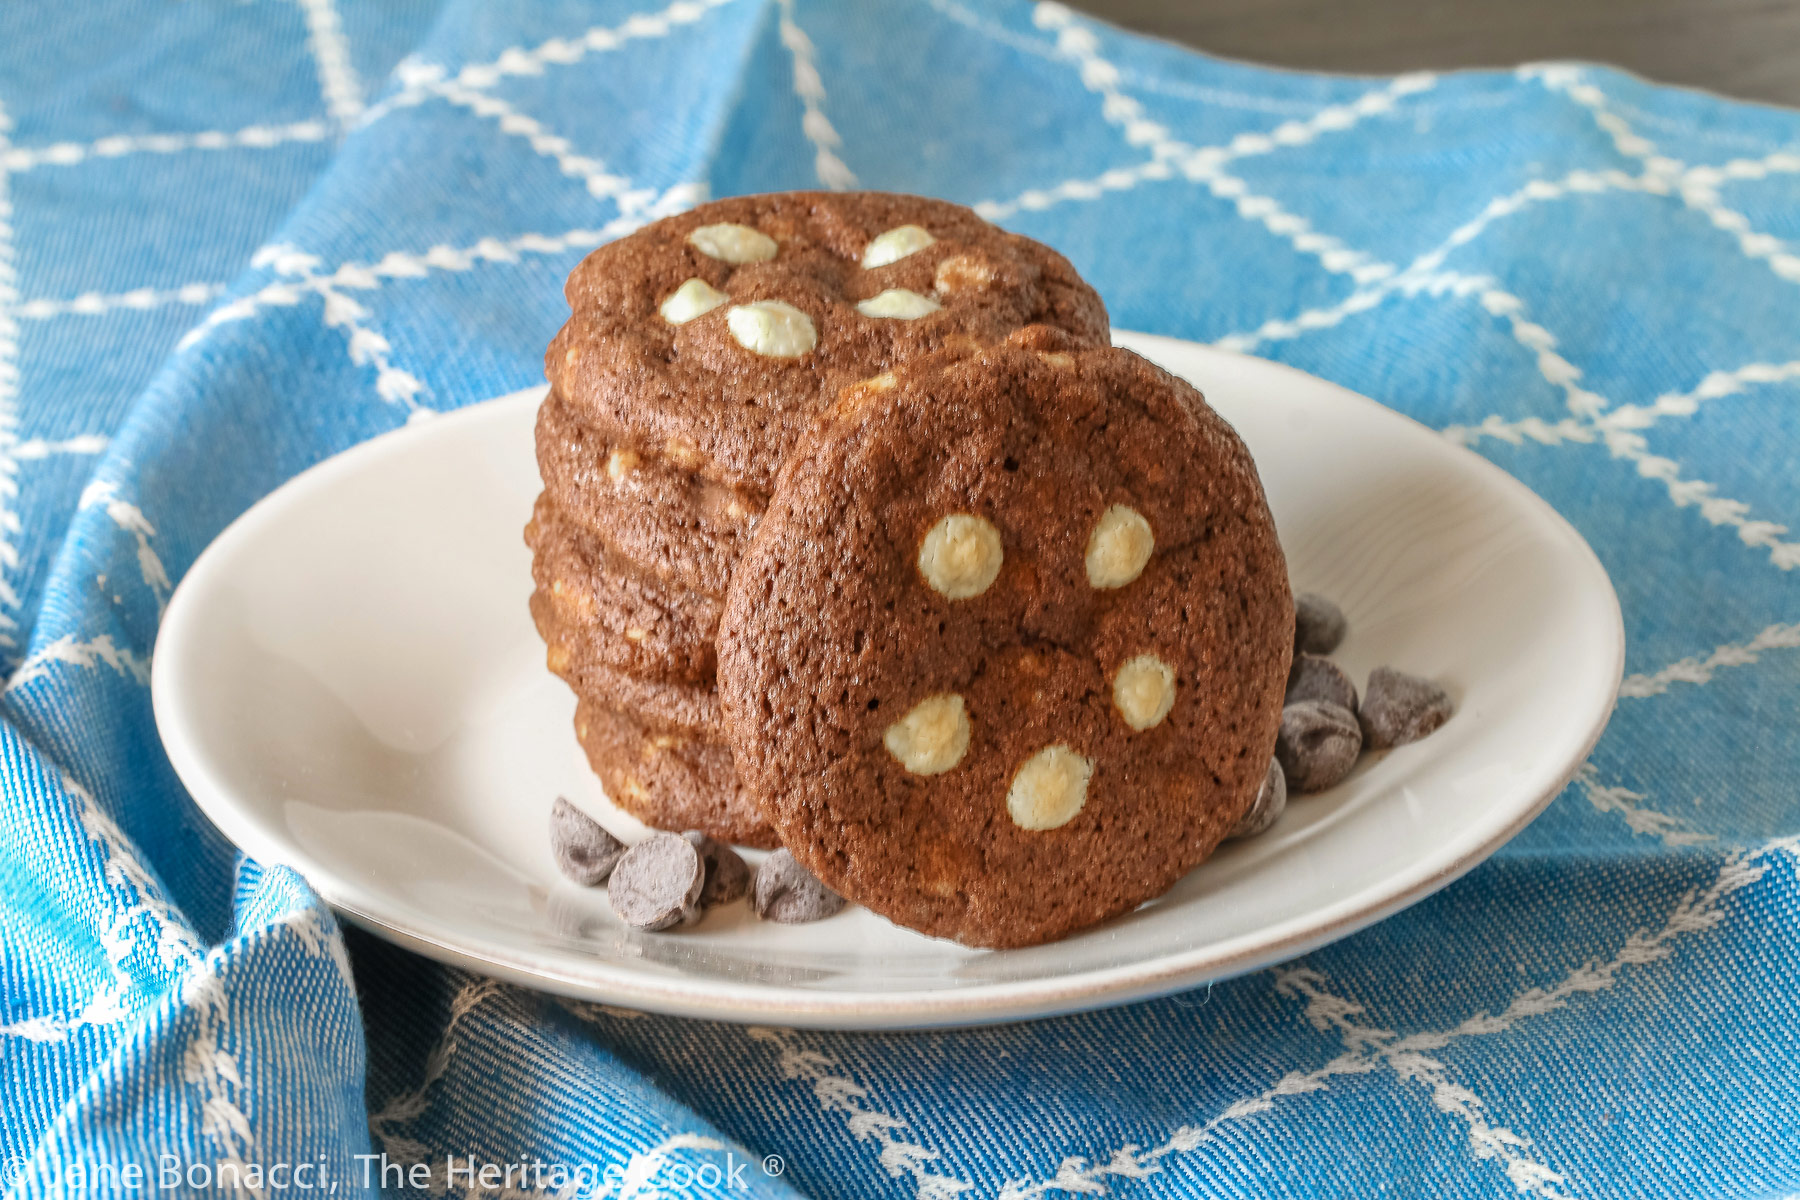 A stack of 5 dark chocolate cookies with white chocolate chips arranged on the top of each cookie, some with a cookie propped up against the stack, all on a white plate; Quadruple Chocolate Cookies © 2023 Jane Bonacci, The Heritage Cook. 